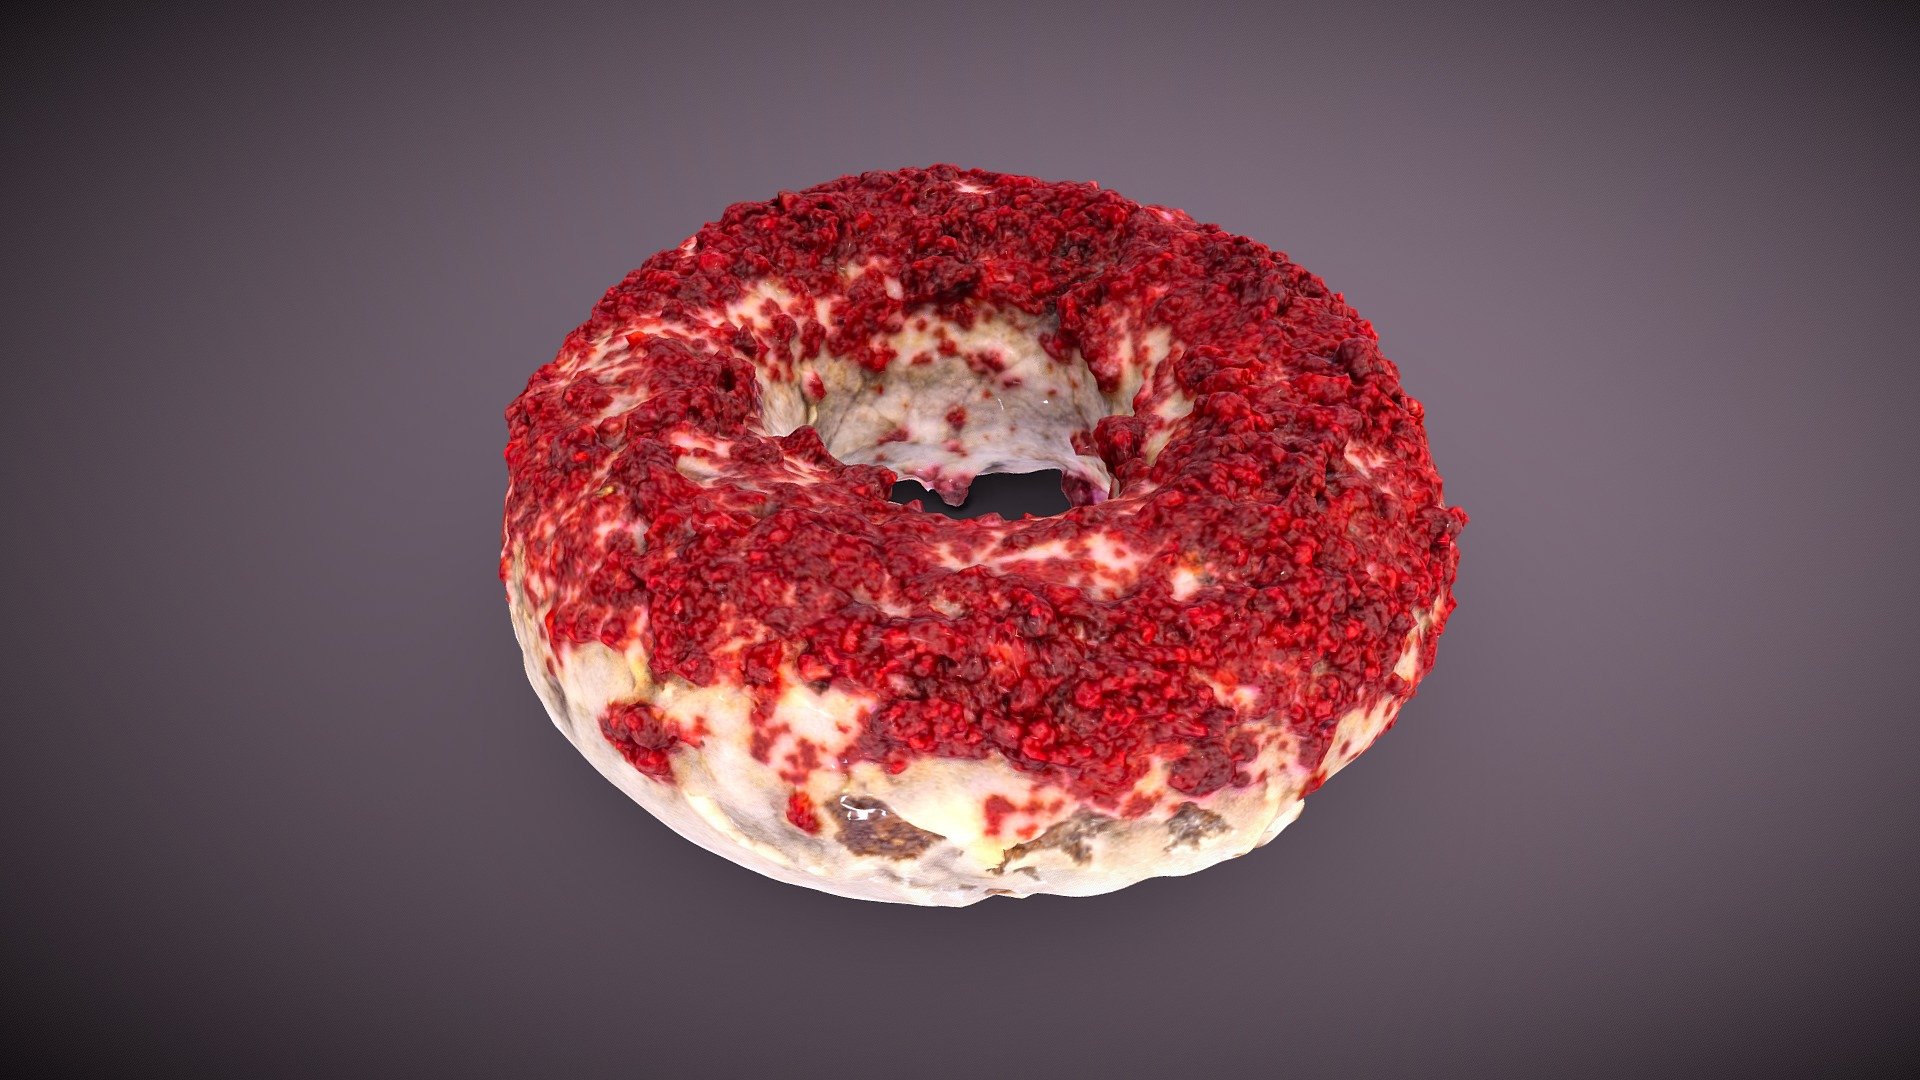 Red Velvet doughnut from Doughnut Plant in NYC

3D scanned with a turntable, lots of lights, and a single A7R

Cleanup and retopology to quads in ZBrush

Full textures are 8K x 8K 3d model